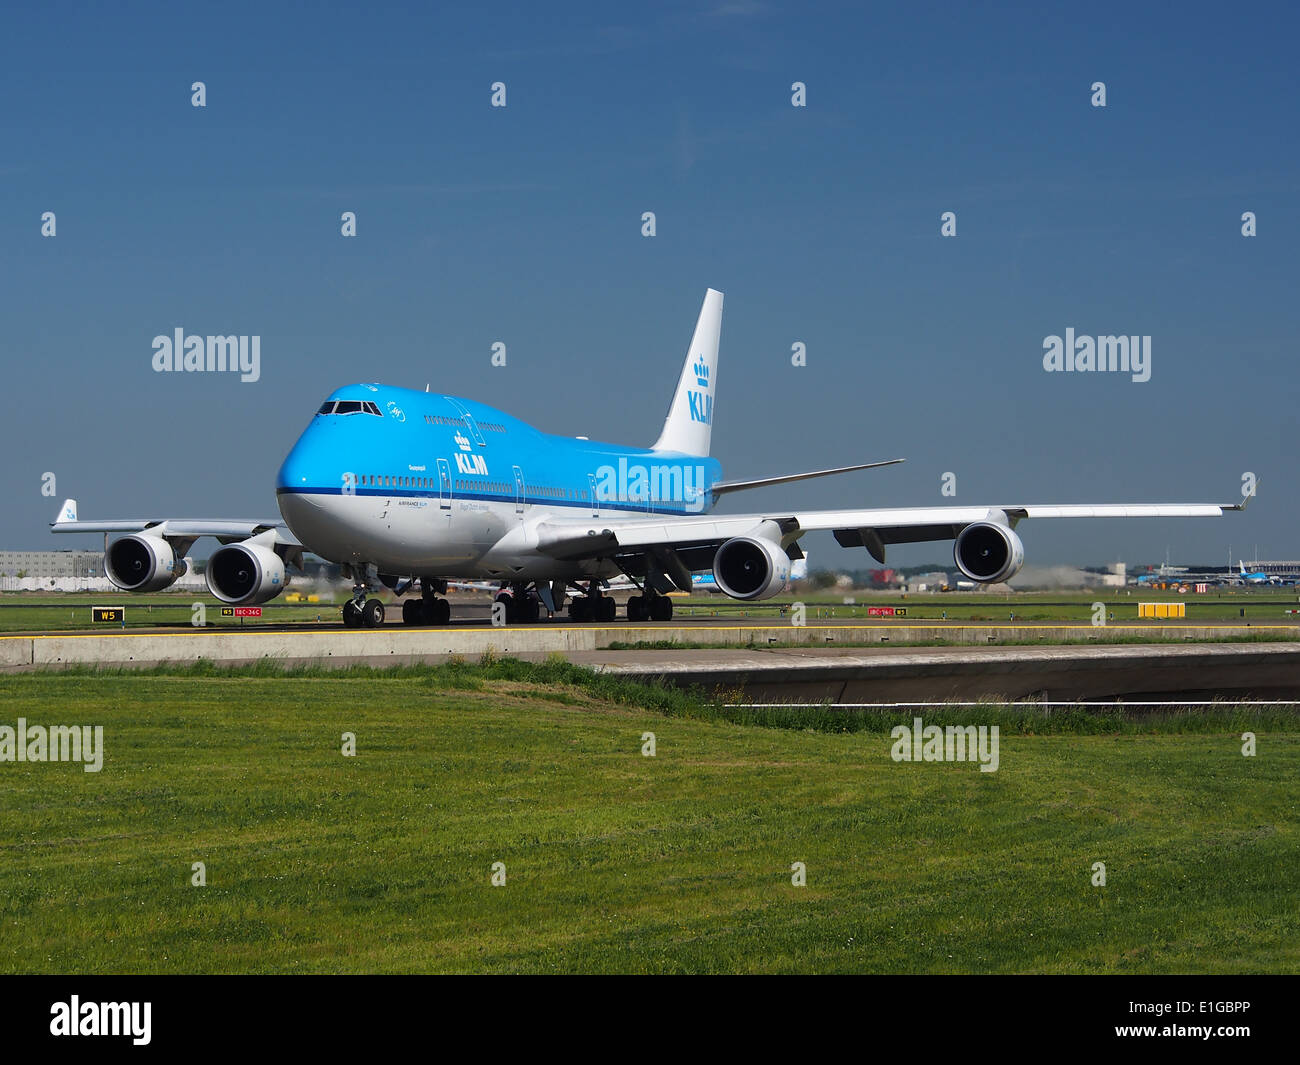 PH-BFG KLM Royal Dutch Airlines Boeing 747-406 at Schiphol (AMS - EHAM), The Netherlands, 16may2014, pic-2 Stock Photo